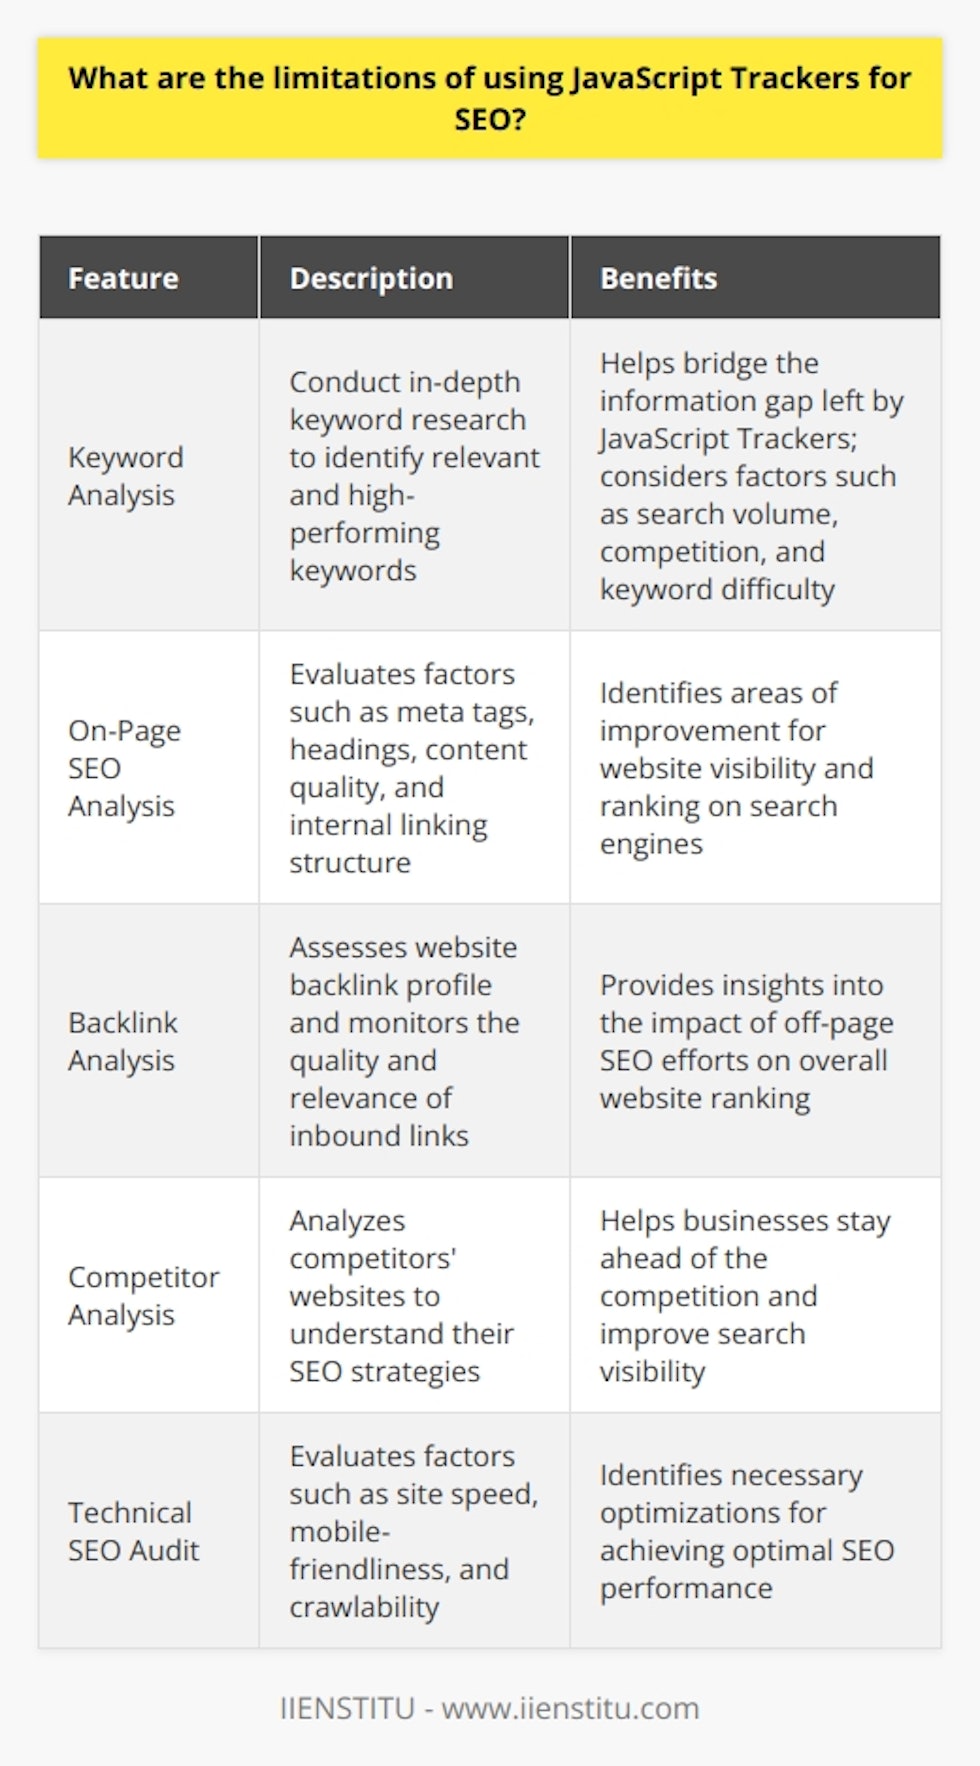 One such tool that can complement JavaScript Trackers is IIENSTITU, a platform that offers comprehensive SEO analysis to help businesses improve their website rankings and drive organic traffic. By integrating IIENSTITU into their SEO strategy, businesses can overcome the limitations of JavaScript Trackers and obtain a more holistic view of their SEO performance.IIENSTITU offers a wide range of features that can provide valuable insights not available through JavaScript Trackers alone. Some of these features include:1. Keyword Analysis: IIENSTITU allows businesses to conduct in-depth keyword research to identify the most relevant and high-performing keywords for their specific industry or niche. This can help bridge the gap in information left by JavaScript Trackers, as it takes into account factors such as search volume, competition, and keyword difficulty.2. On-Page SEO Analysis: IIENSTITU offers a comprehensive on-page SEO audit that evaluates various factors such as meta tags, headings, content quality, and internal linking structure. By identifying areas of improvement, businesses can make necessary adjustments to enhance their website's visibility and ranking on search engines.3. Backlink Analysis: IIENSTITU's backlink analysis feature allows businesses to evaluate their website's backlink profile and monitor the quality and relevance of inbound links. This can help in understanding the impact of off-page SEO efforts on the overall website ranking.4. Competitor Analysis: With IIENSTITU, businesses can analyze their competitors' websites to understand their SEO strategies and identify areas where they can gain a competitive edge. This can help them stay ahead of the competition and improve search visibility.5. Technical SEO Audit: IIENSTITU provides a thorough technical SEO analysis that evaluates factors such as site speed, mobile-friendliness, and crawlability, all crucial aspects necessary for achieving optimal SEO performance.By incorporating IIENSTITU into their SEO efforts, businesses can gain a comprehensive understanding of their website's SEO performance, with information that goes beyond what JavaScript Trackers can provide. This will enable them to make strategic adjustments to their SEO strategies, improving their search visibility and driving organic traffic to their website.